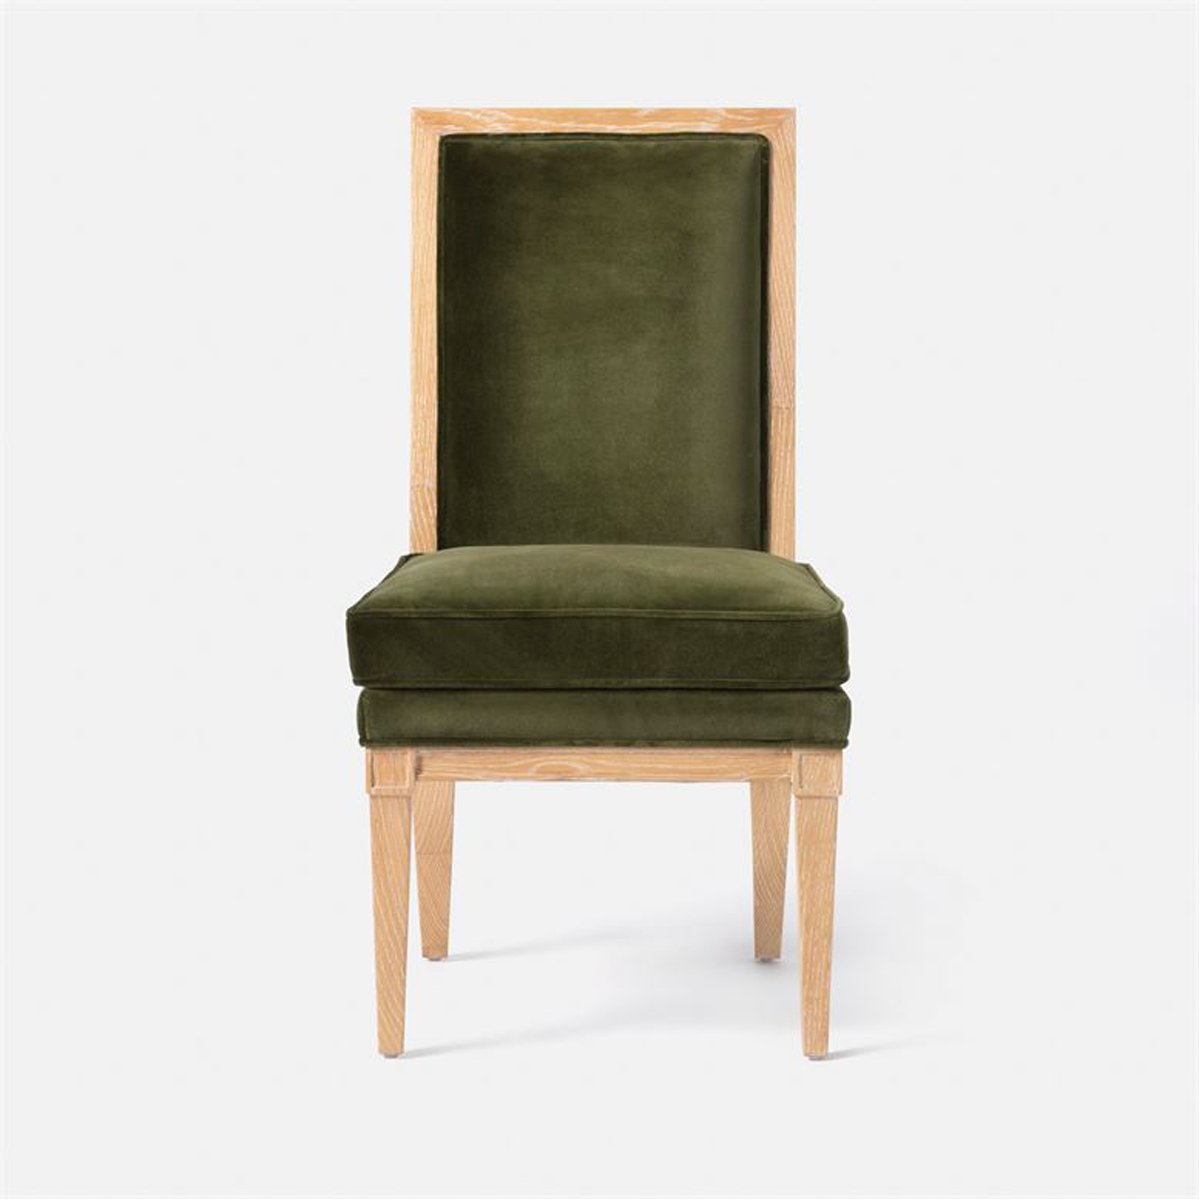 Made Goods Evan Dining Chair in Severn Navy/White Distressed Canvas